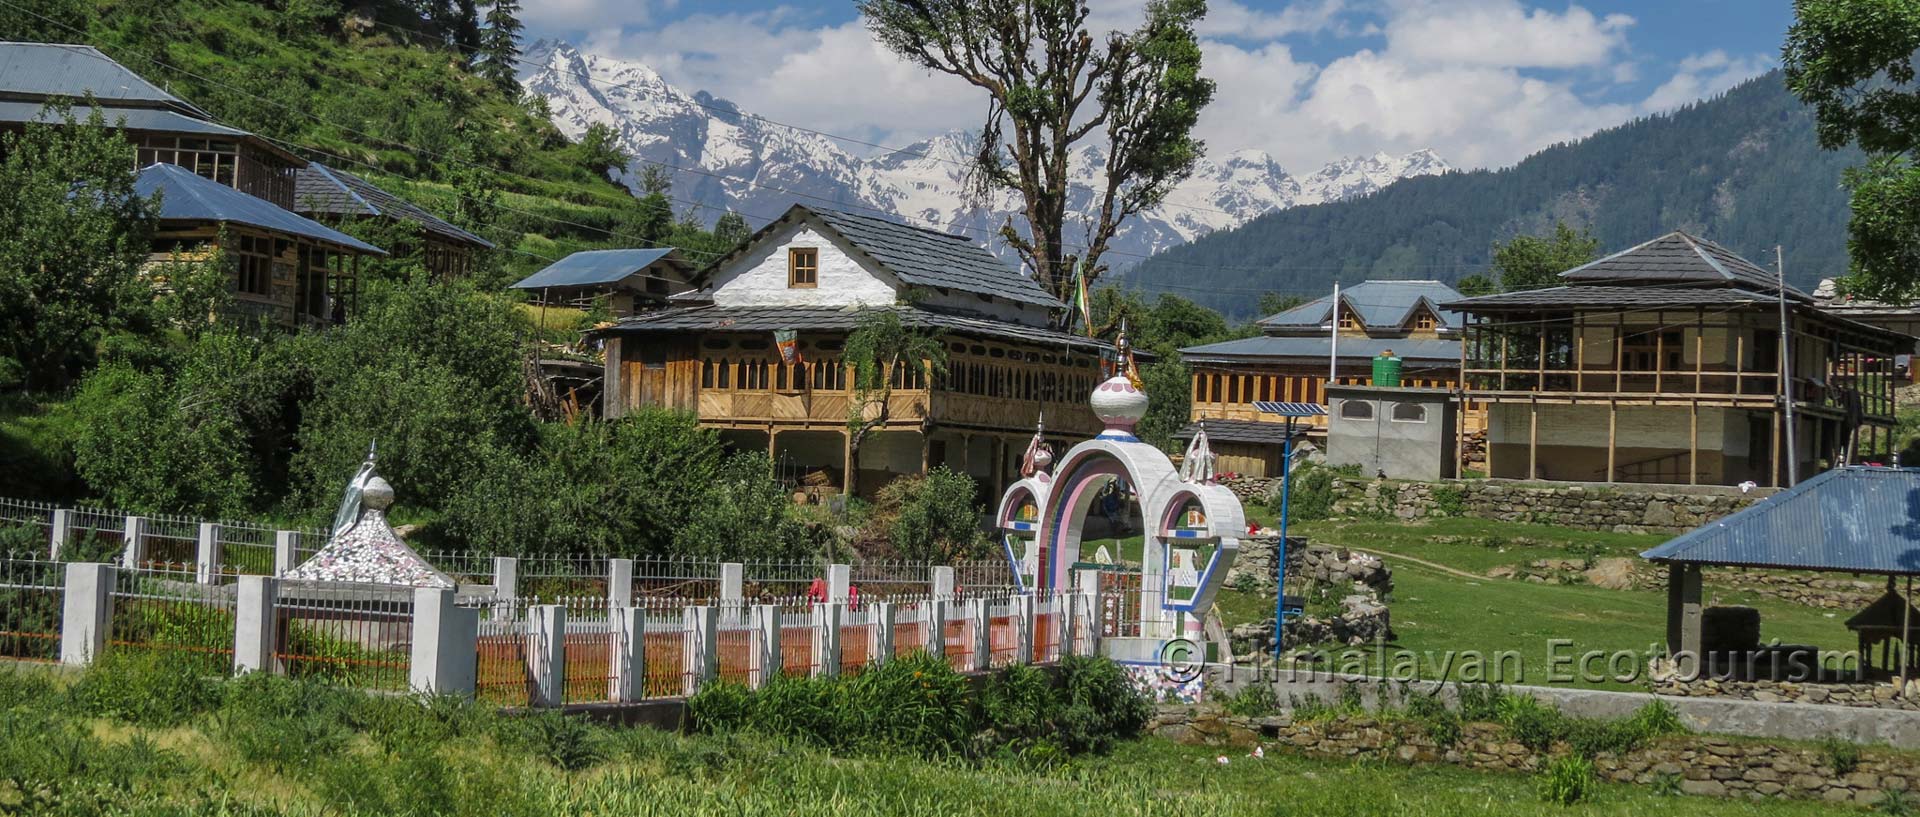 Local culture - Homestay in Tirthan Valley